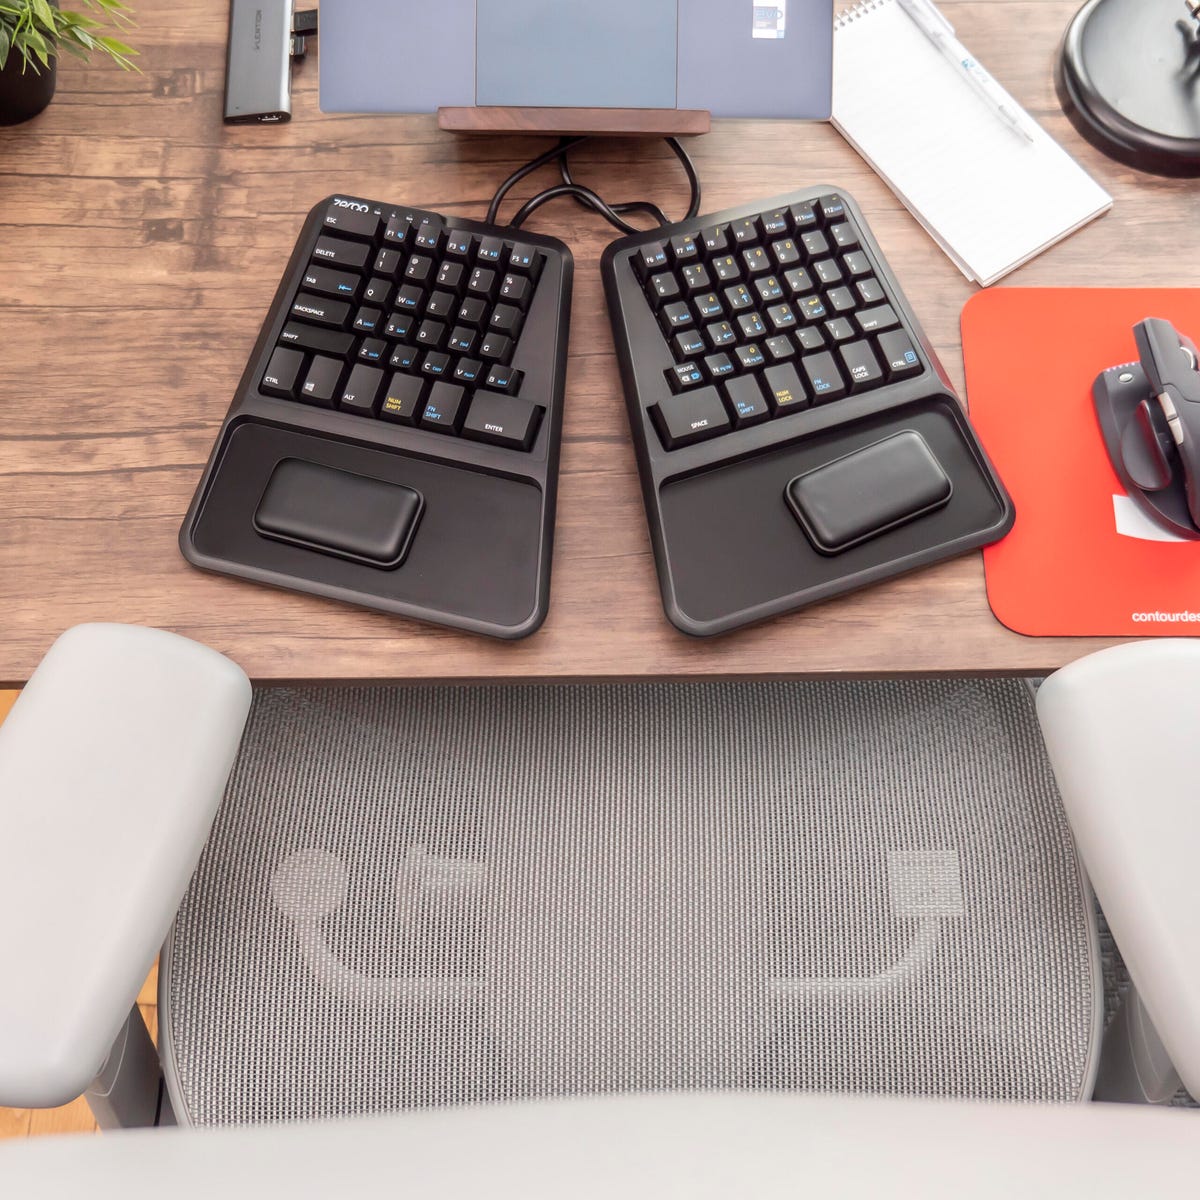 7 Must-Have Ergonomic Upgrades for Your Home Office - CNET